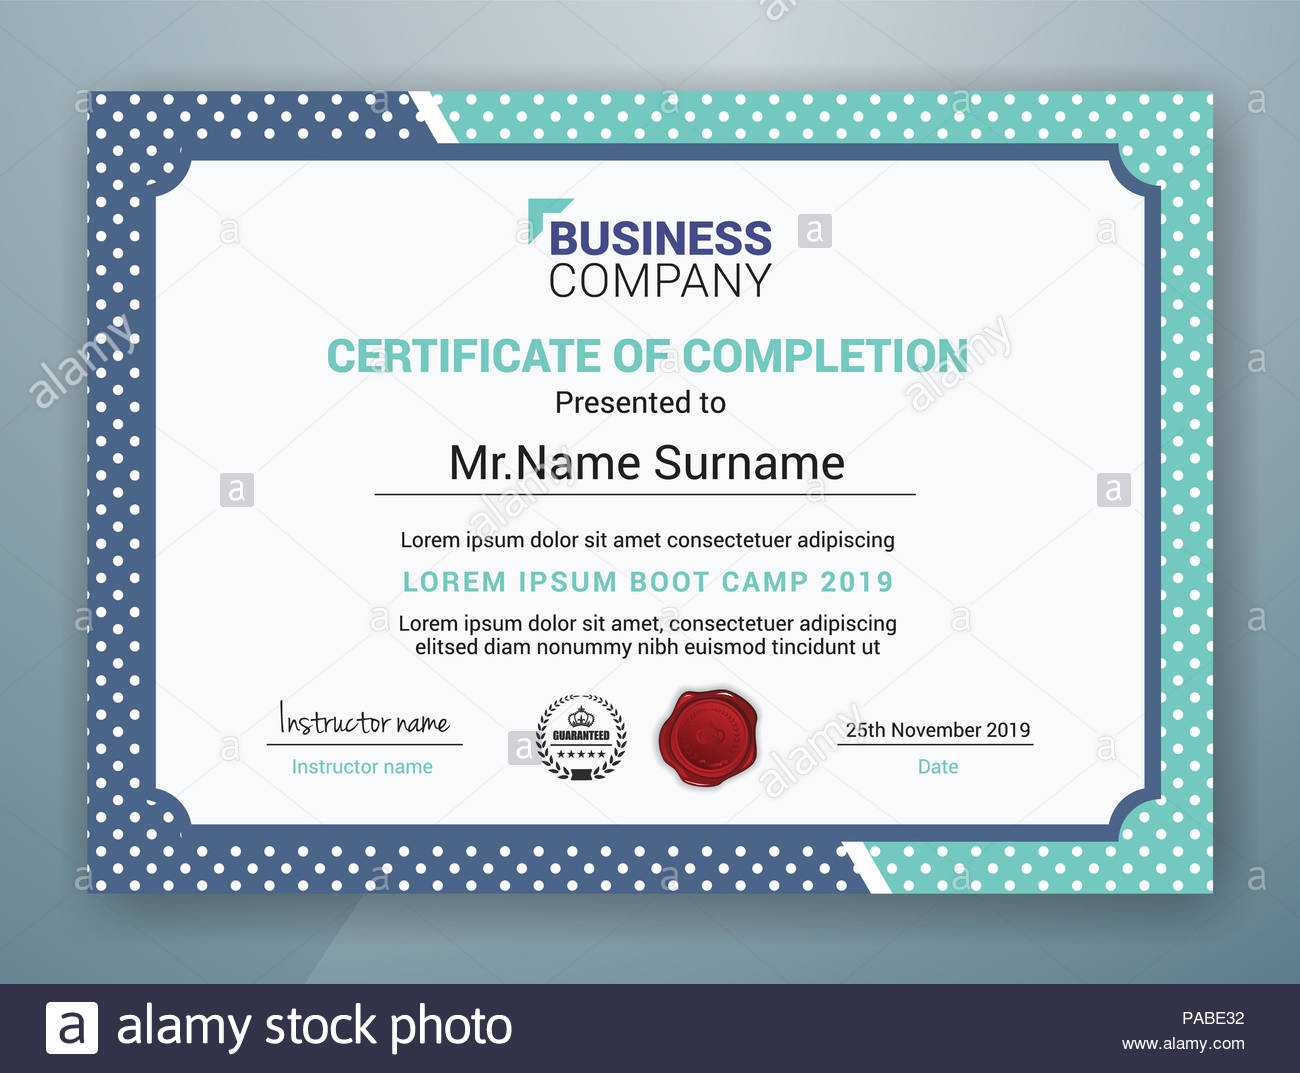 Multipurpose Professional Certificate Template Design For Throughout Boot Camp Certificate Template